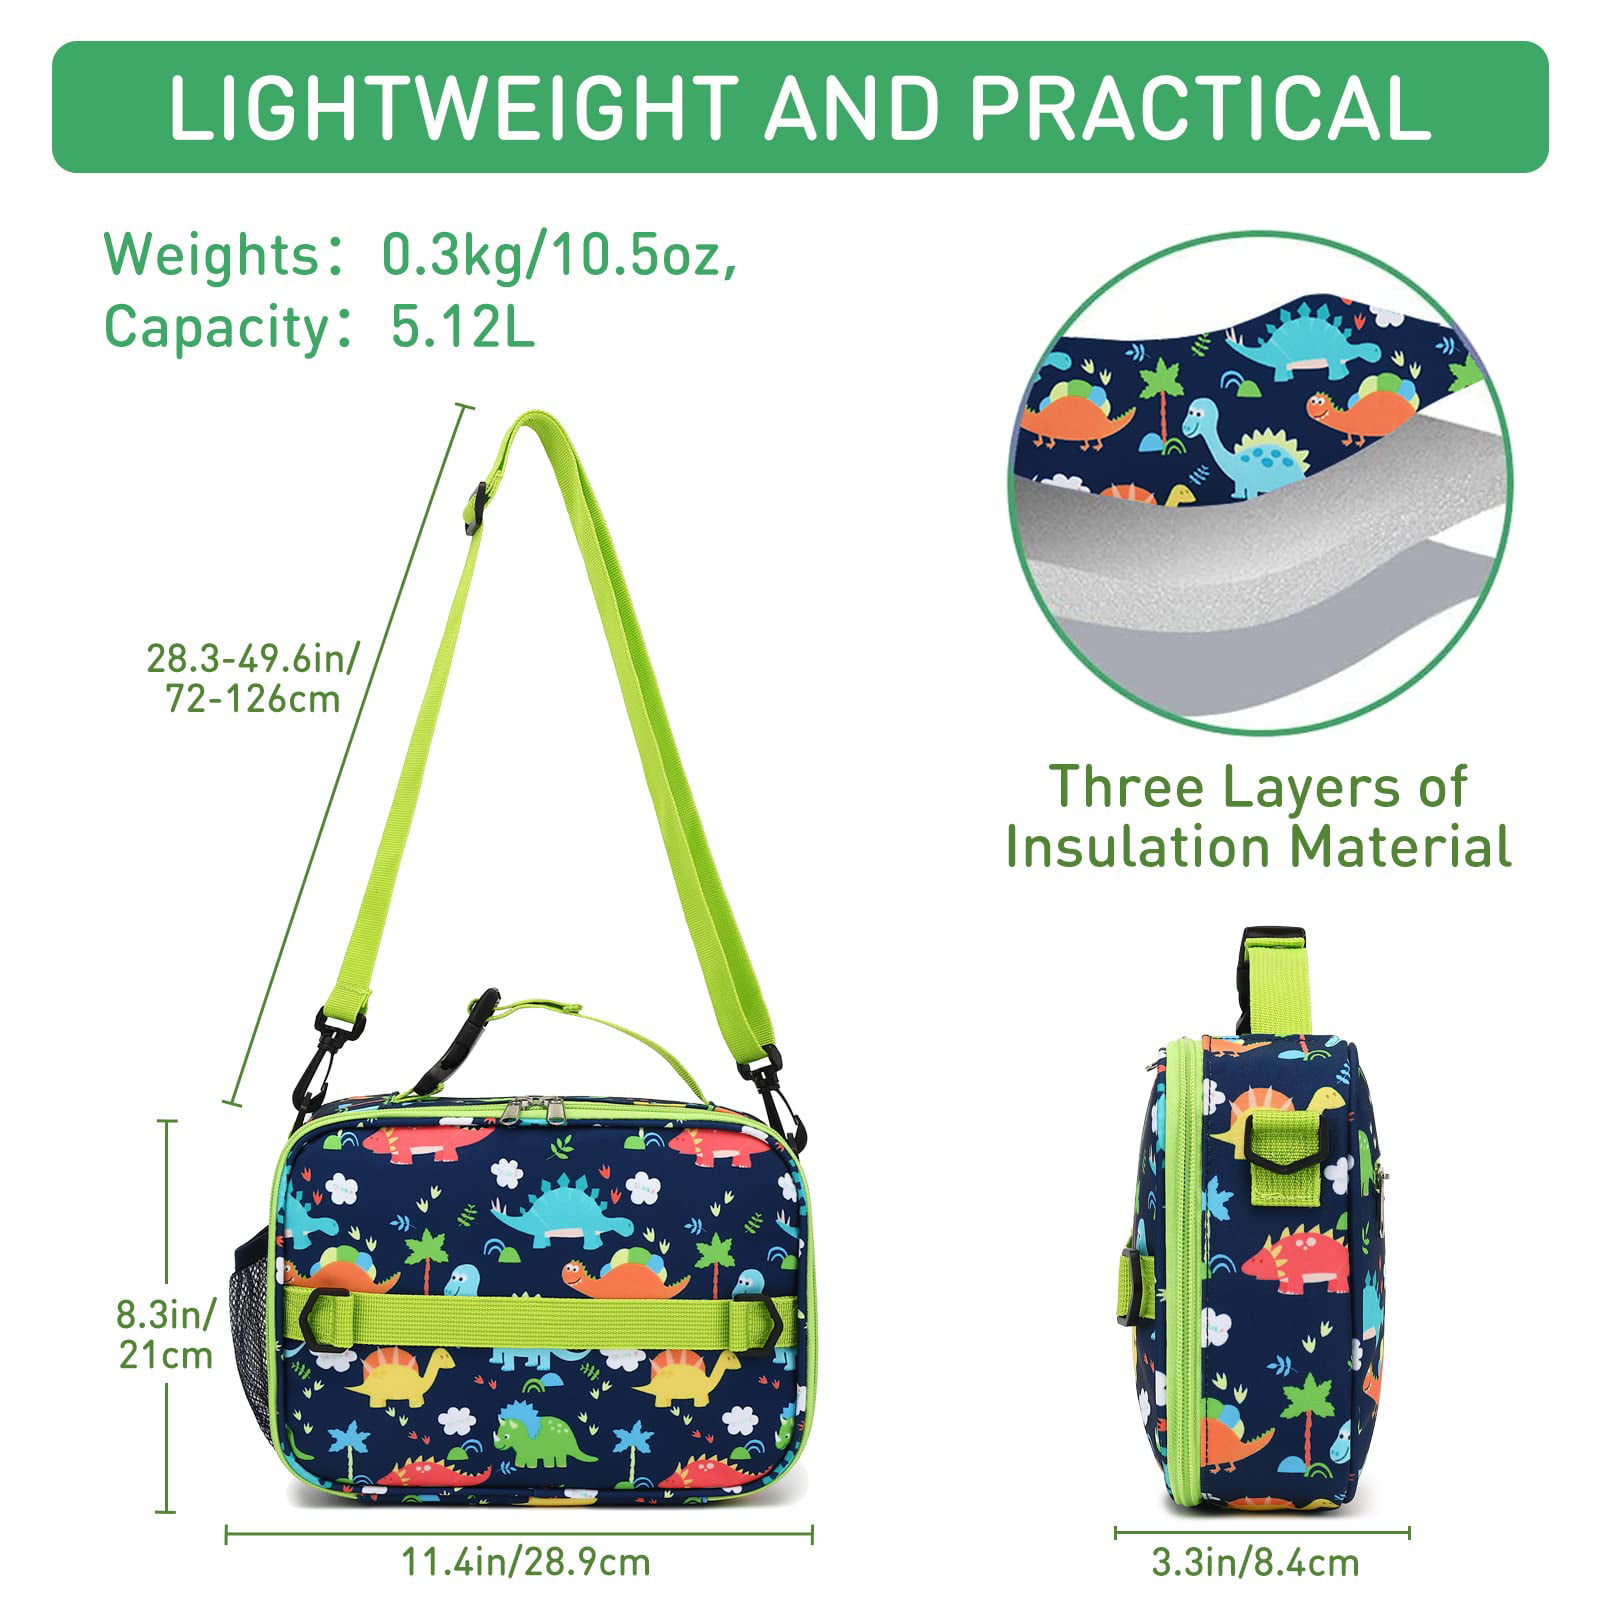 Lieonvis Lunch Box Kids,Insulated Lunch Box for Boys and Girls,Washable Lunch Bag and Reusable Toddler Lunch Boxes for Daycare and School Dinosaur